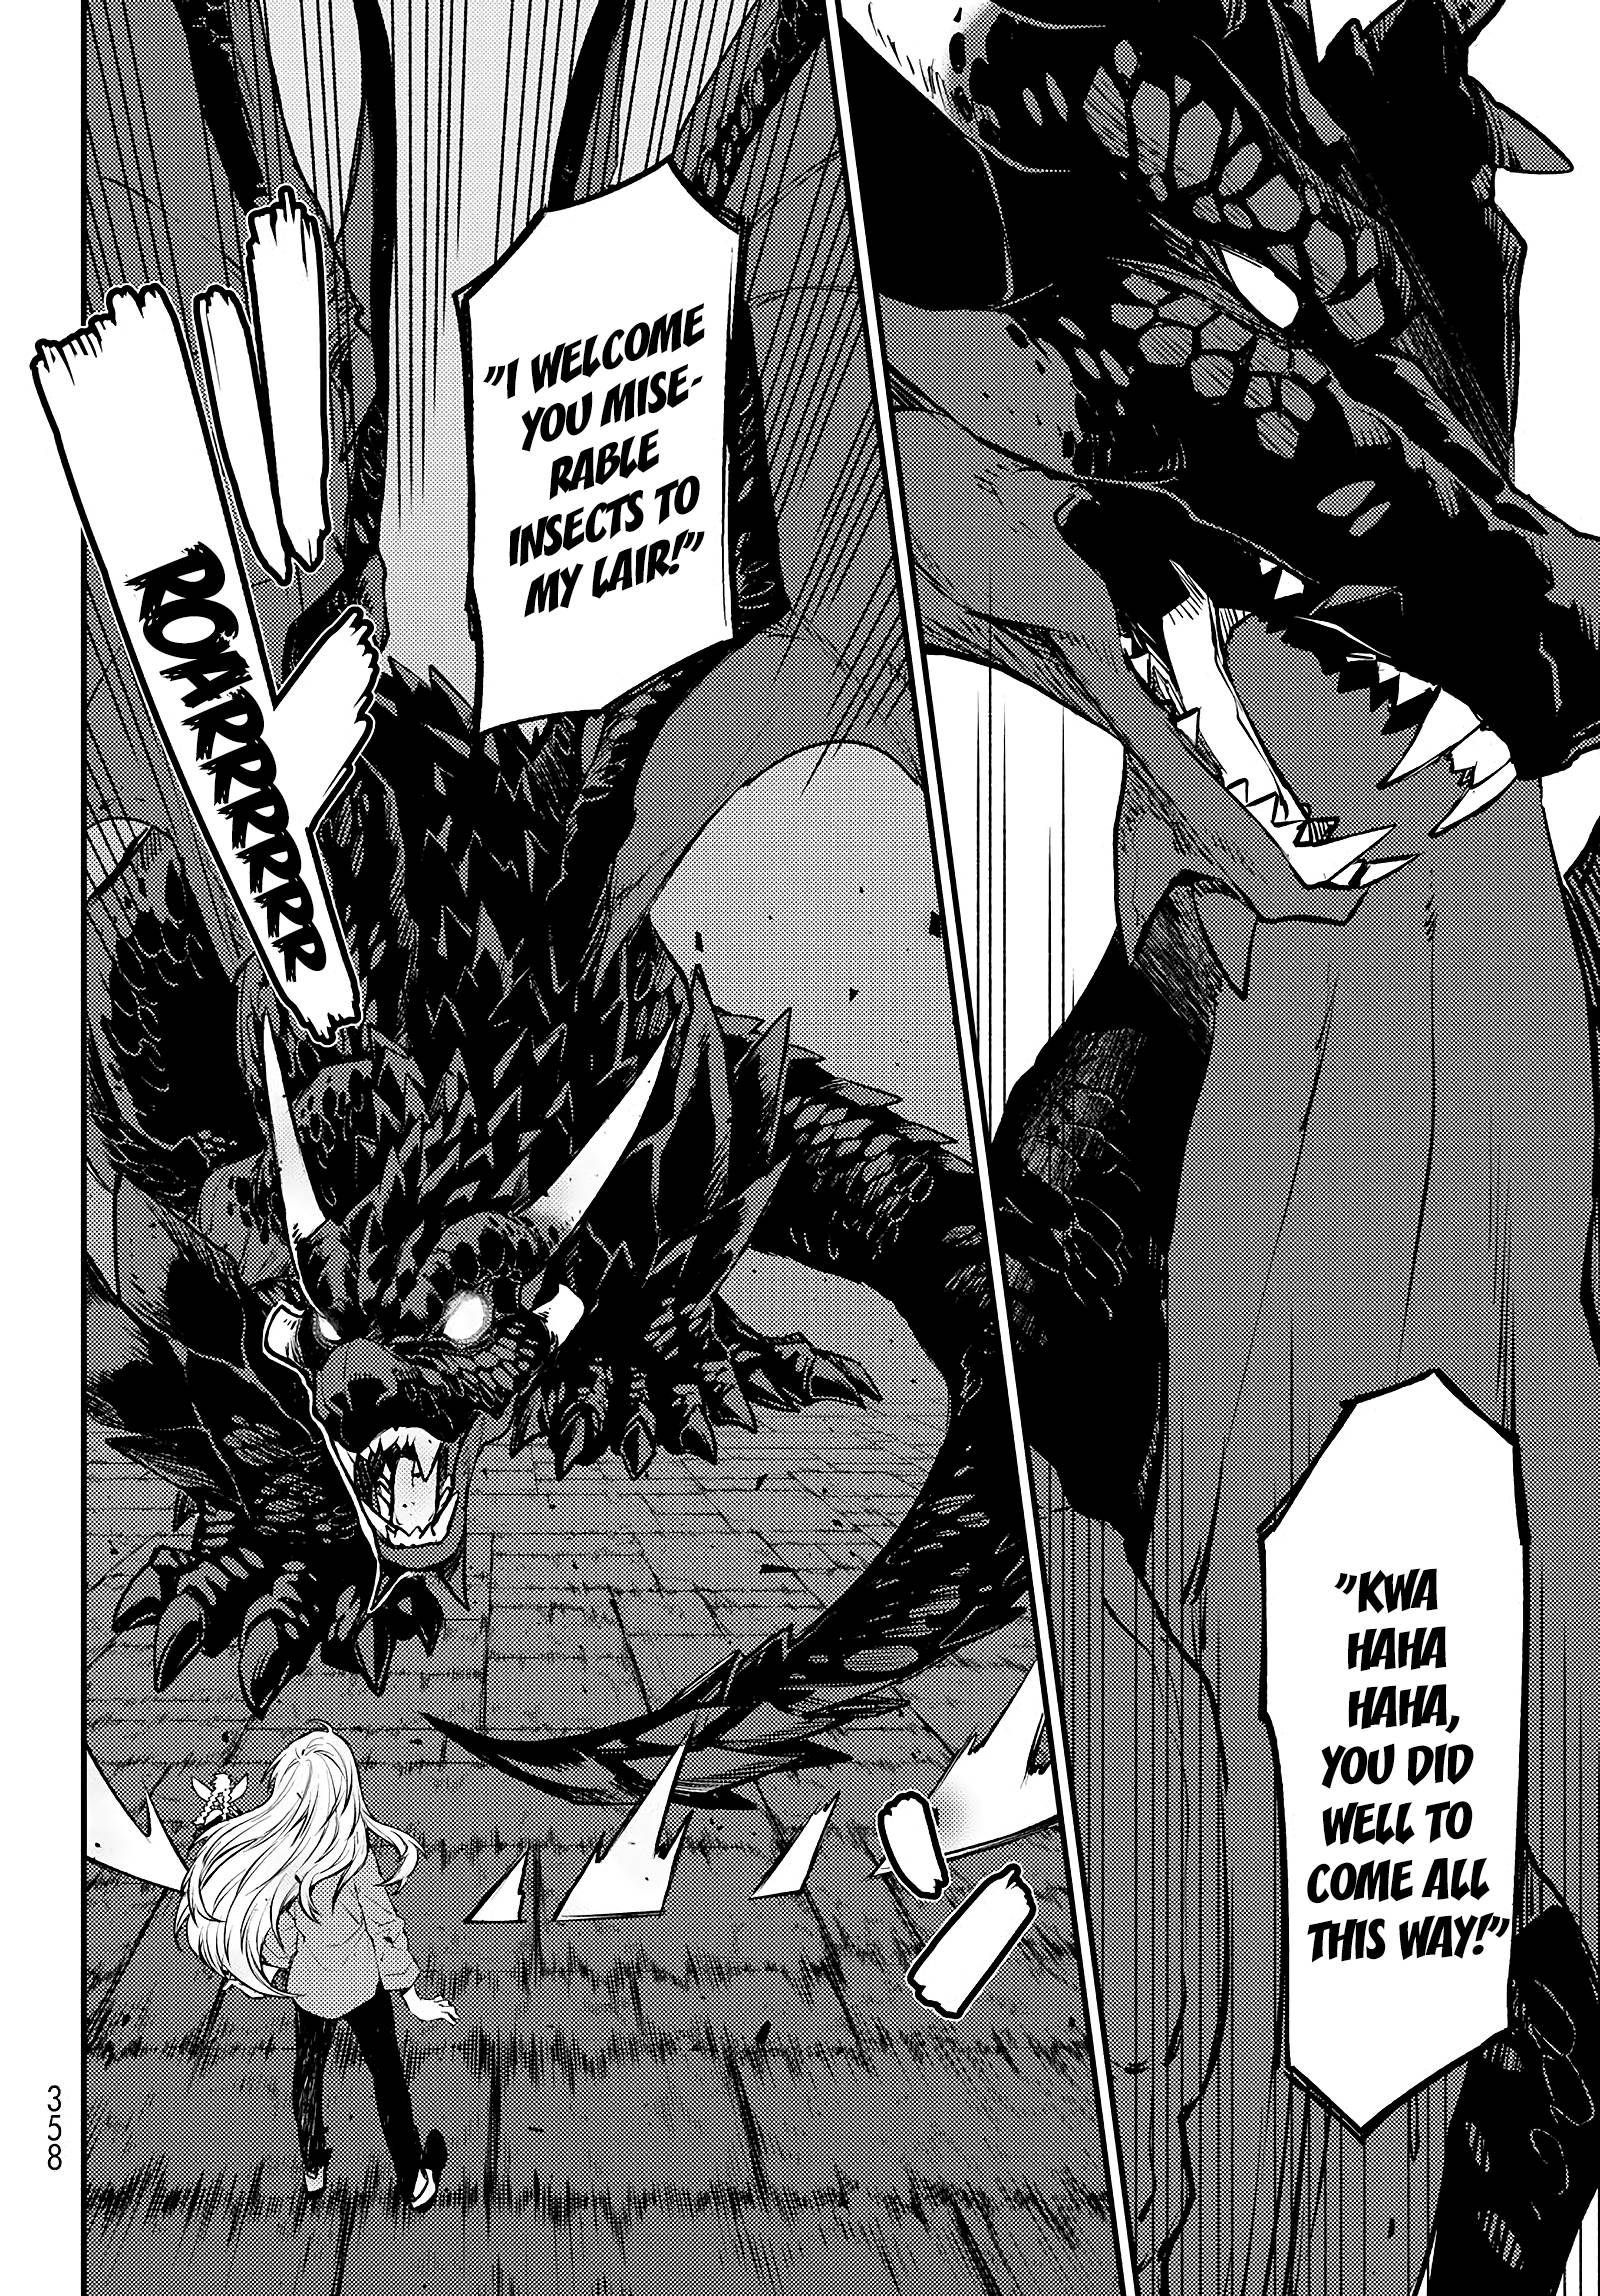 That Time I Got Reincarnated as a Slime, Chapter 104